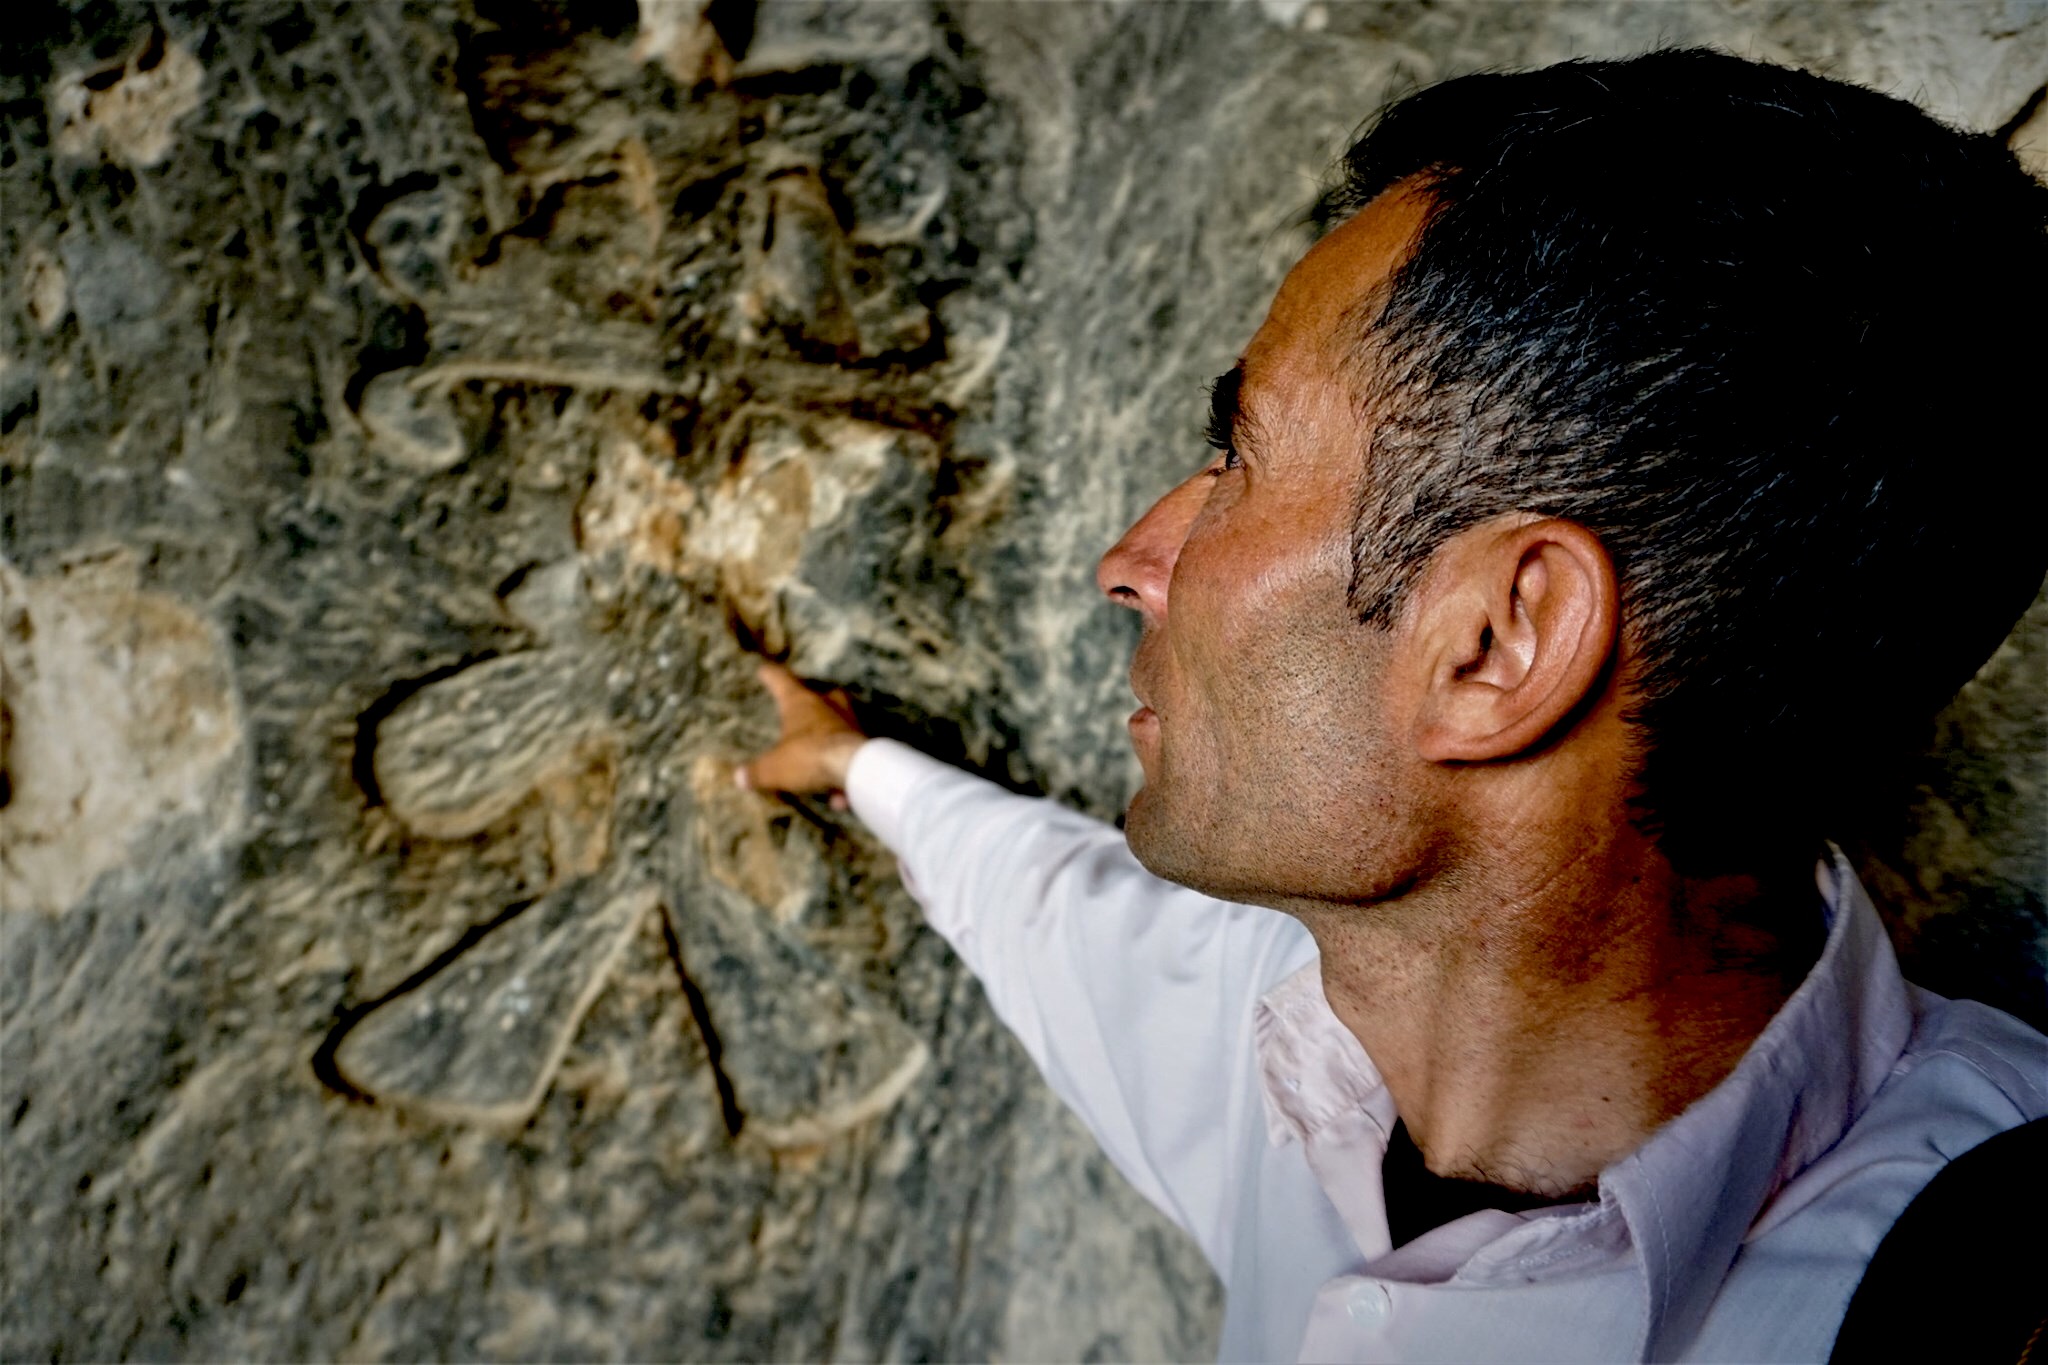 Shepherd Ali points to a leaf-like Christian cross carved on the wall inside one of the caves that would sink under the artificial lake. (Nimet KIRAC/ MEE)